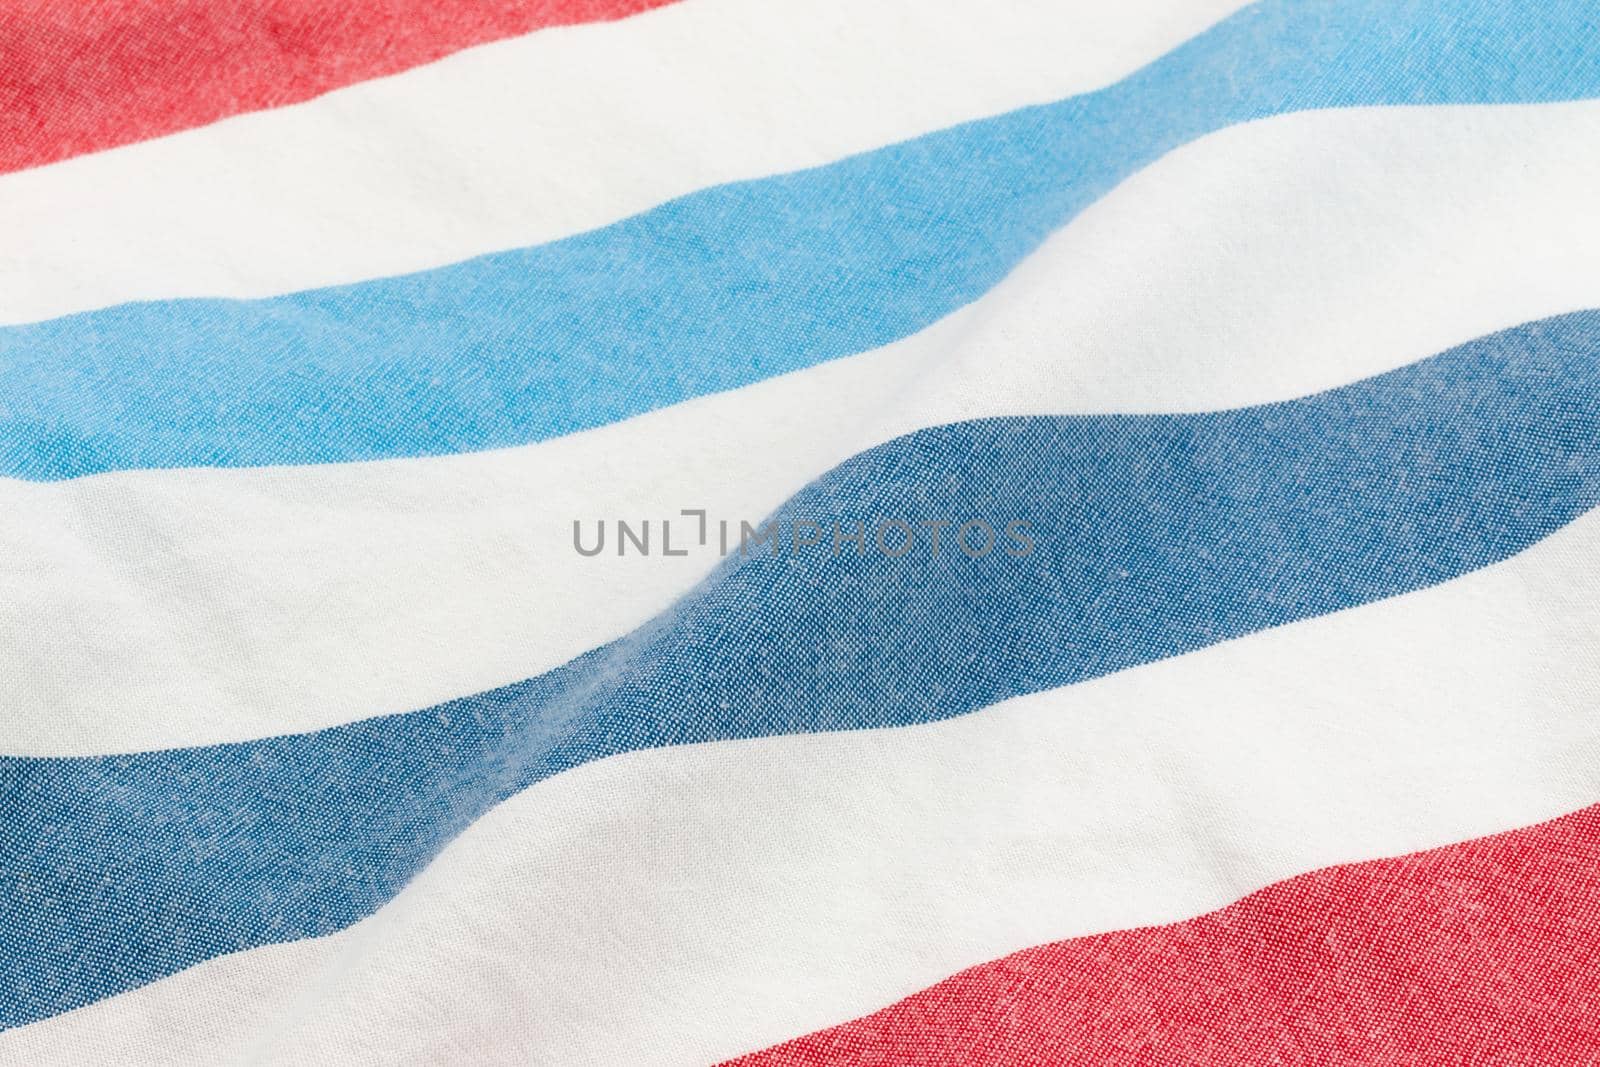 Beautiful summer background made of striped fabric of delicate colors red blue.